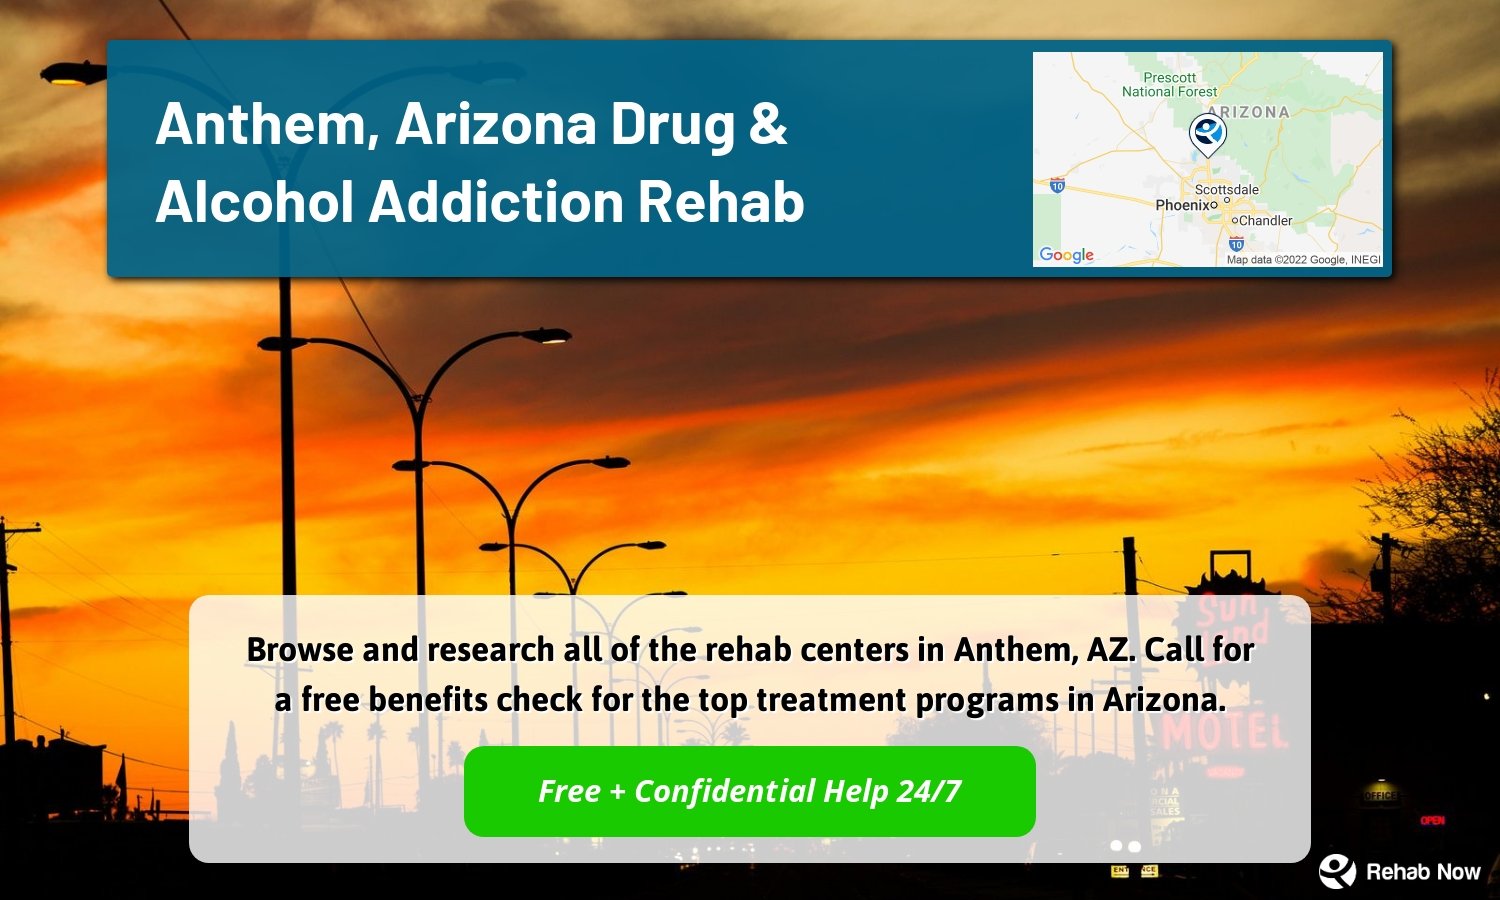 Browse and research all of the rehab centers in Anthem, AZ. Call for a free benefits check for the top treatment programs in Arizona.